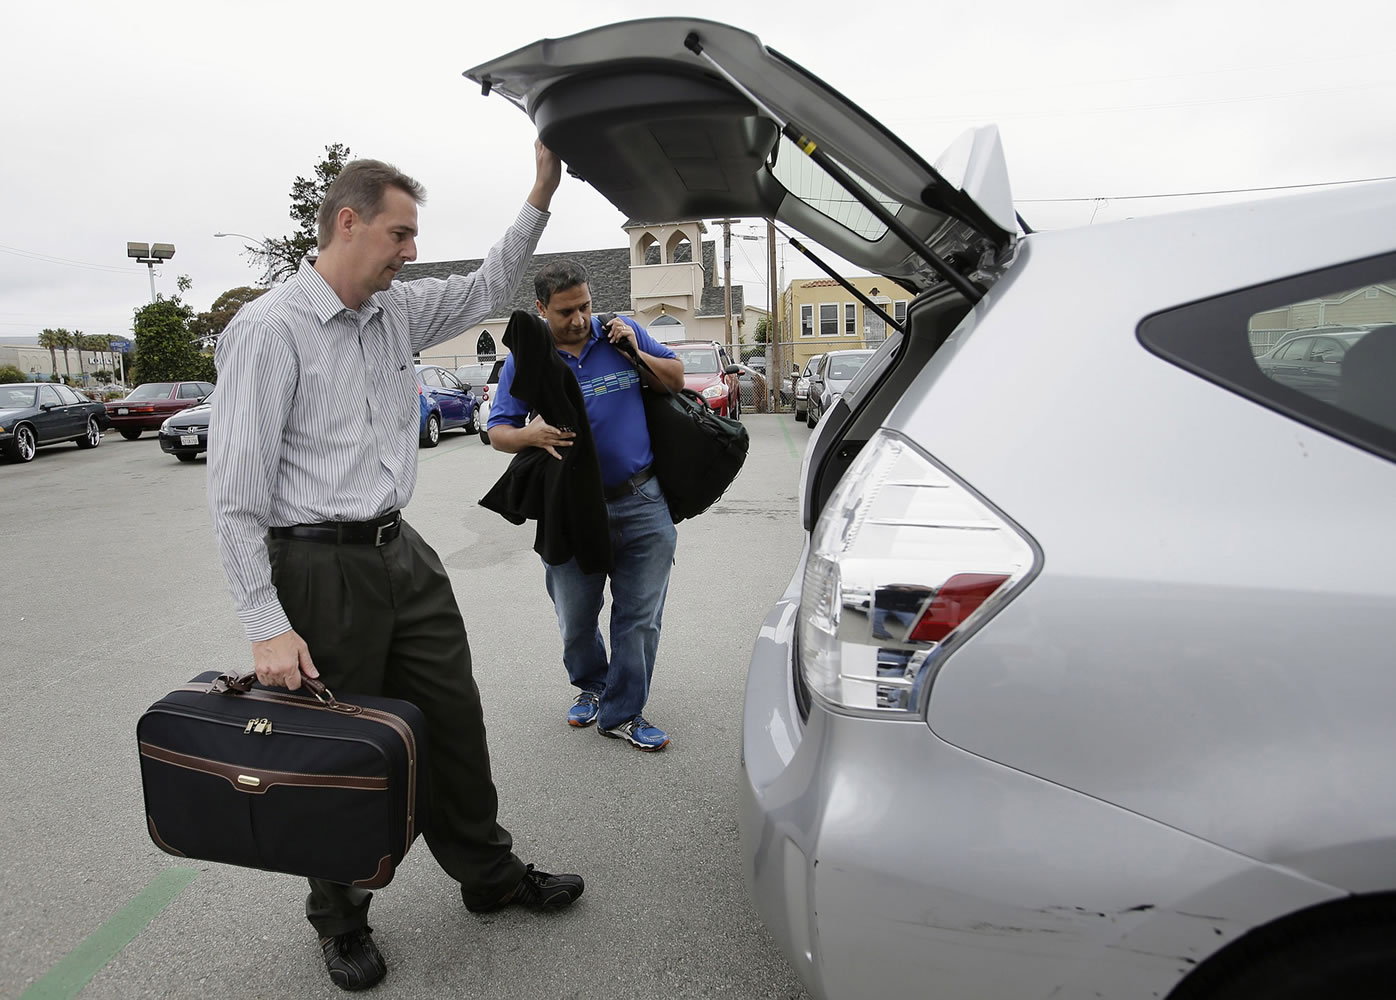 Gary Reyes/Bay Area News Group
John Penny, left, and Marty Puranik load their luggage into a rental Prius at FlightCar in Millbrae, Calif. FlightCar is a car-sharing service that allows travelers to leave their cars in a parking lot so that others can rent them while they are gone.